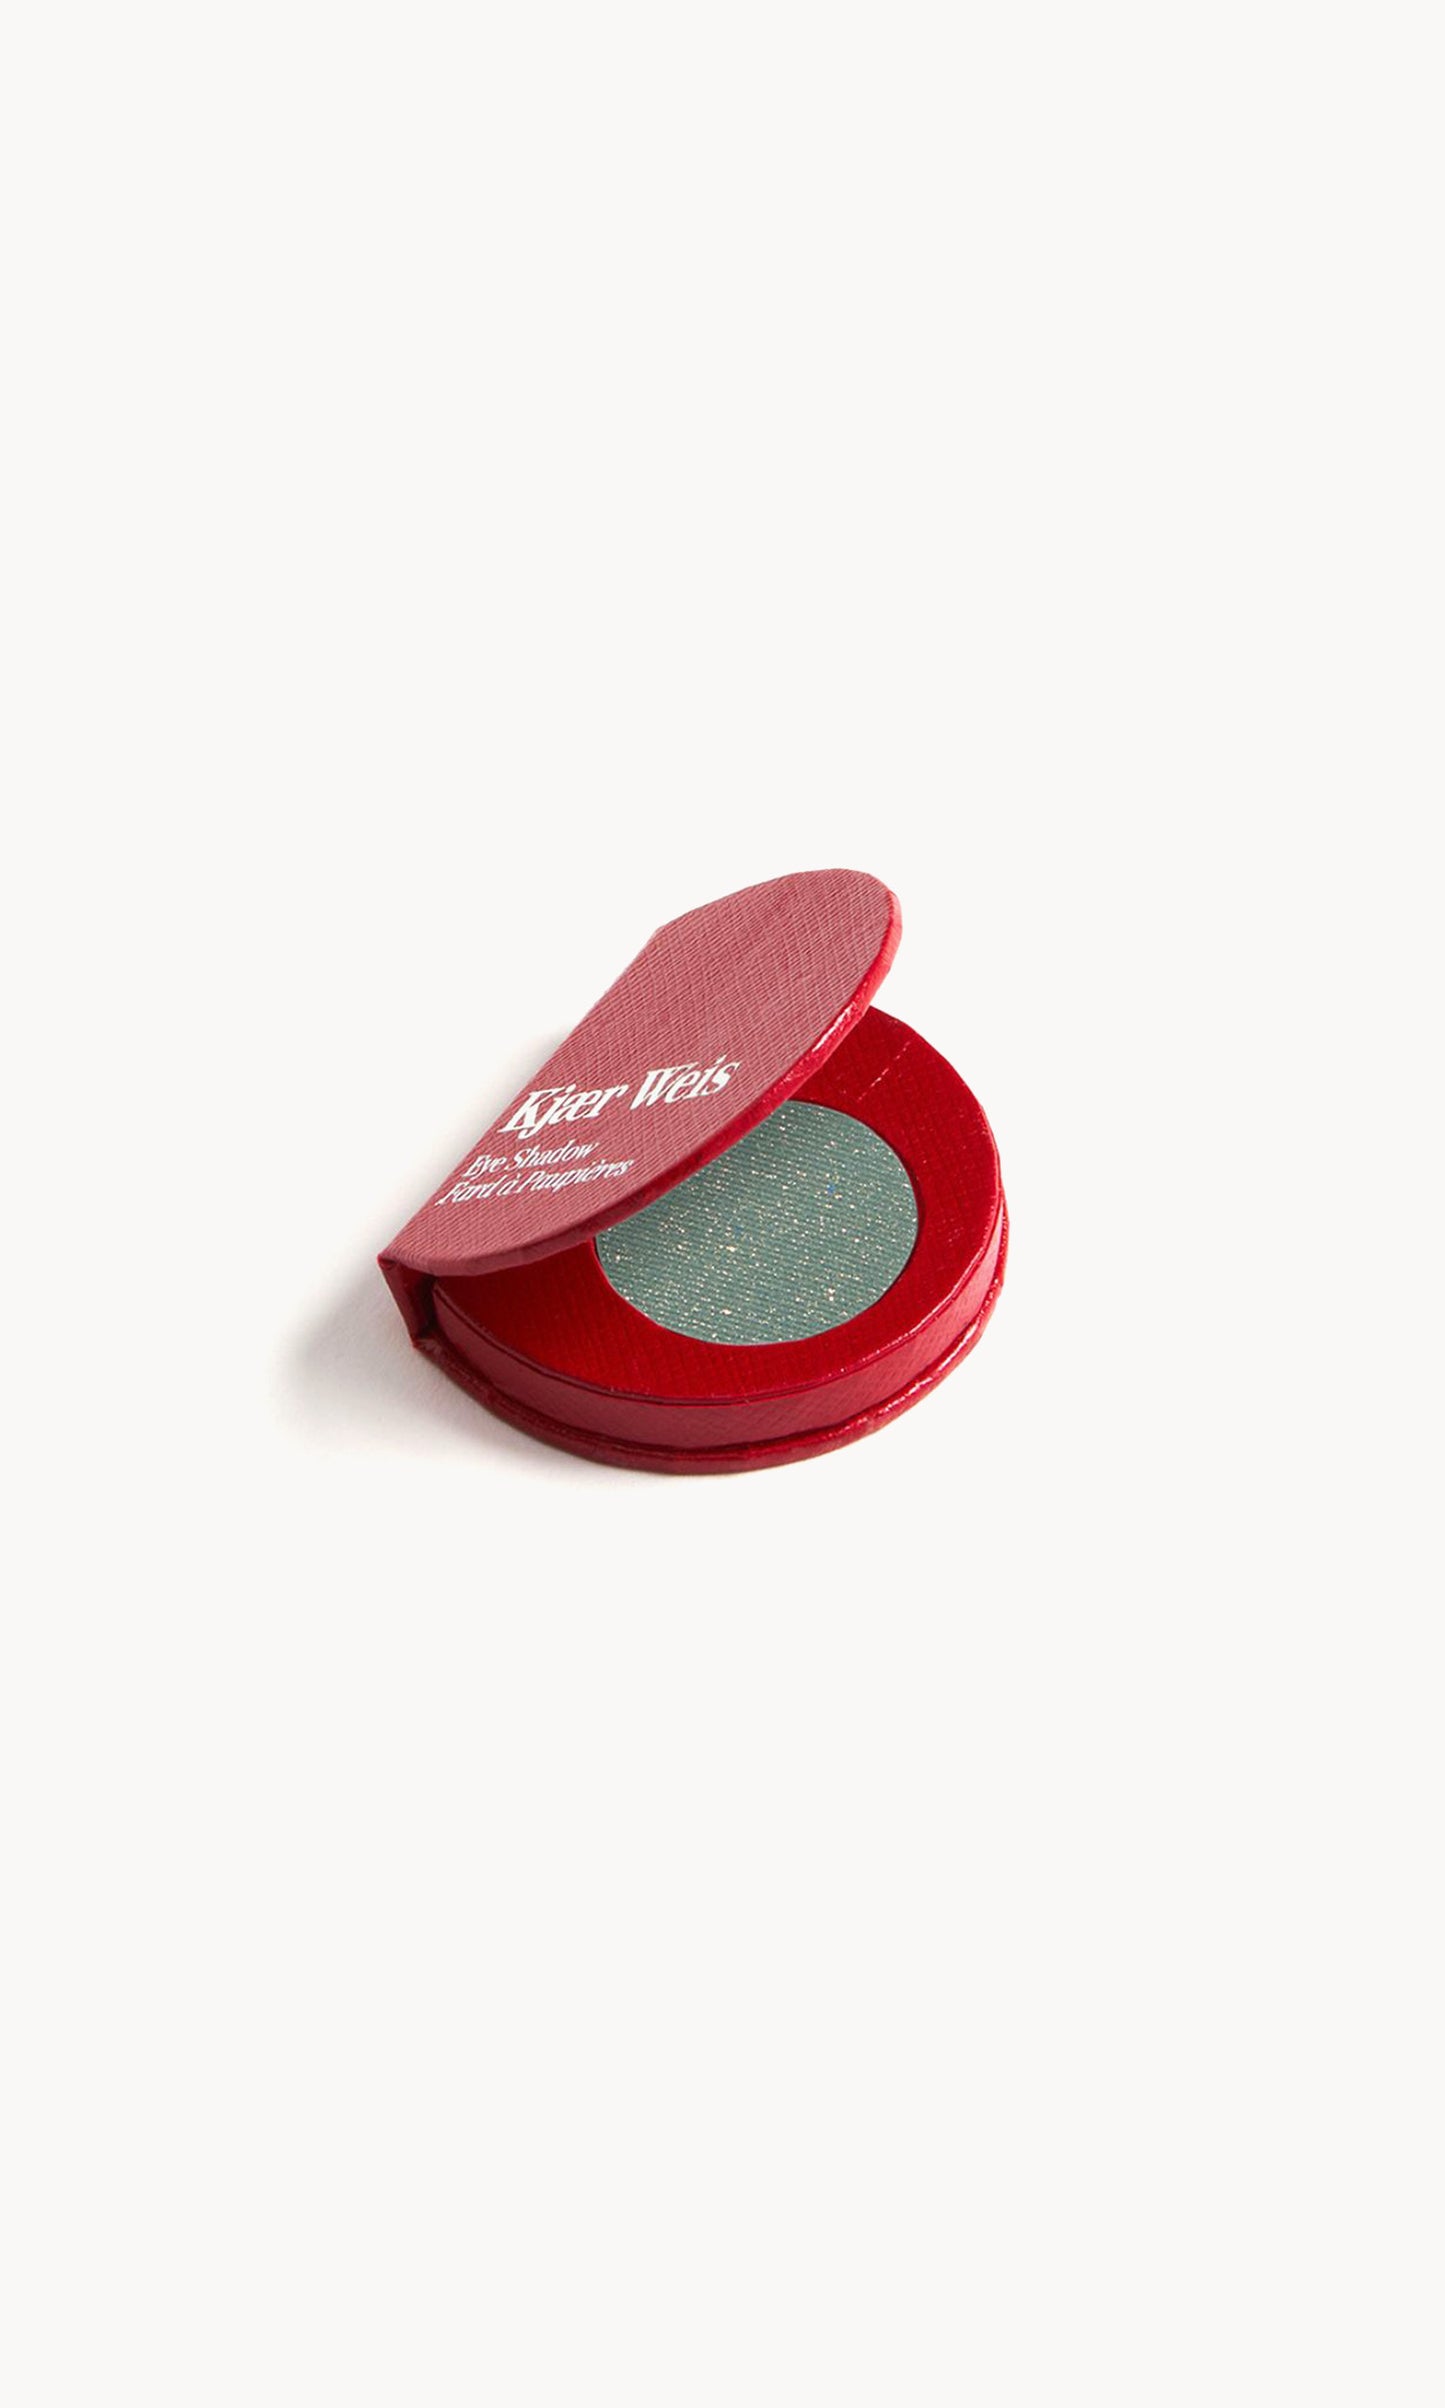 Red KW palette open to show the green eye shadow with gold flecks inside